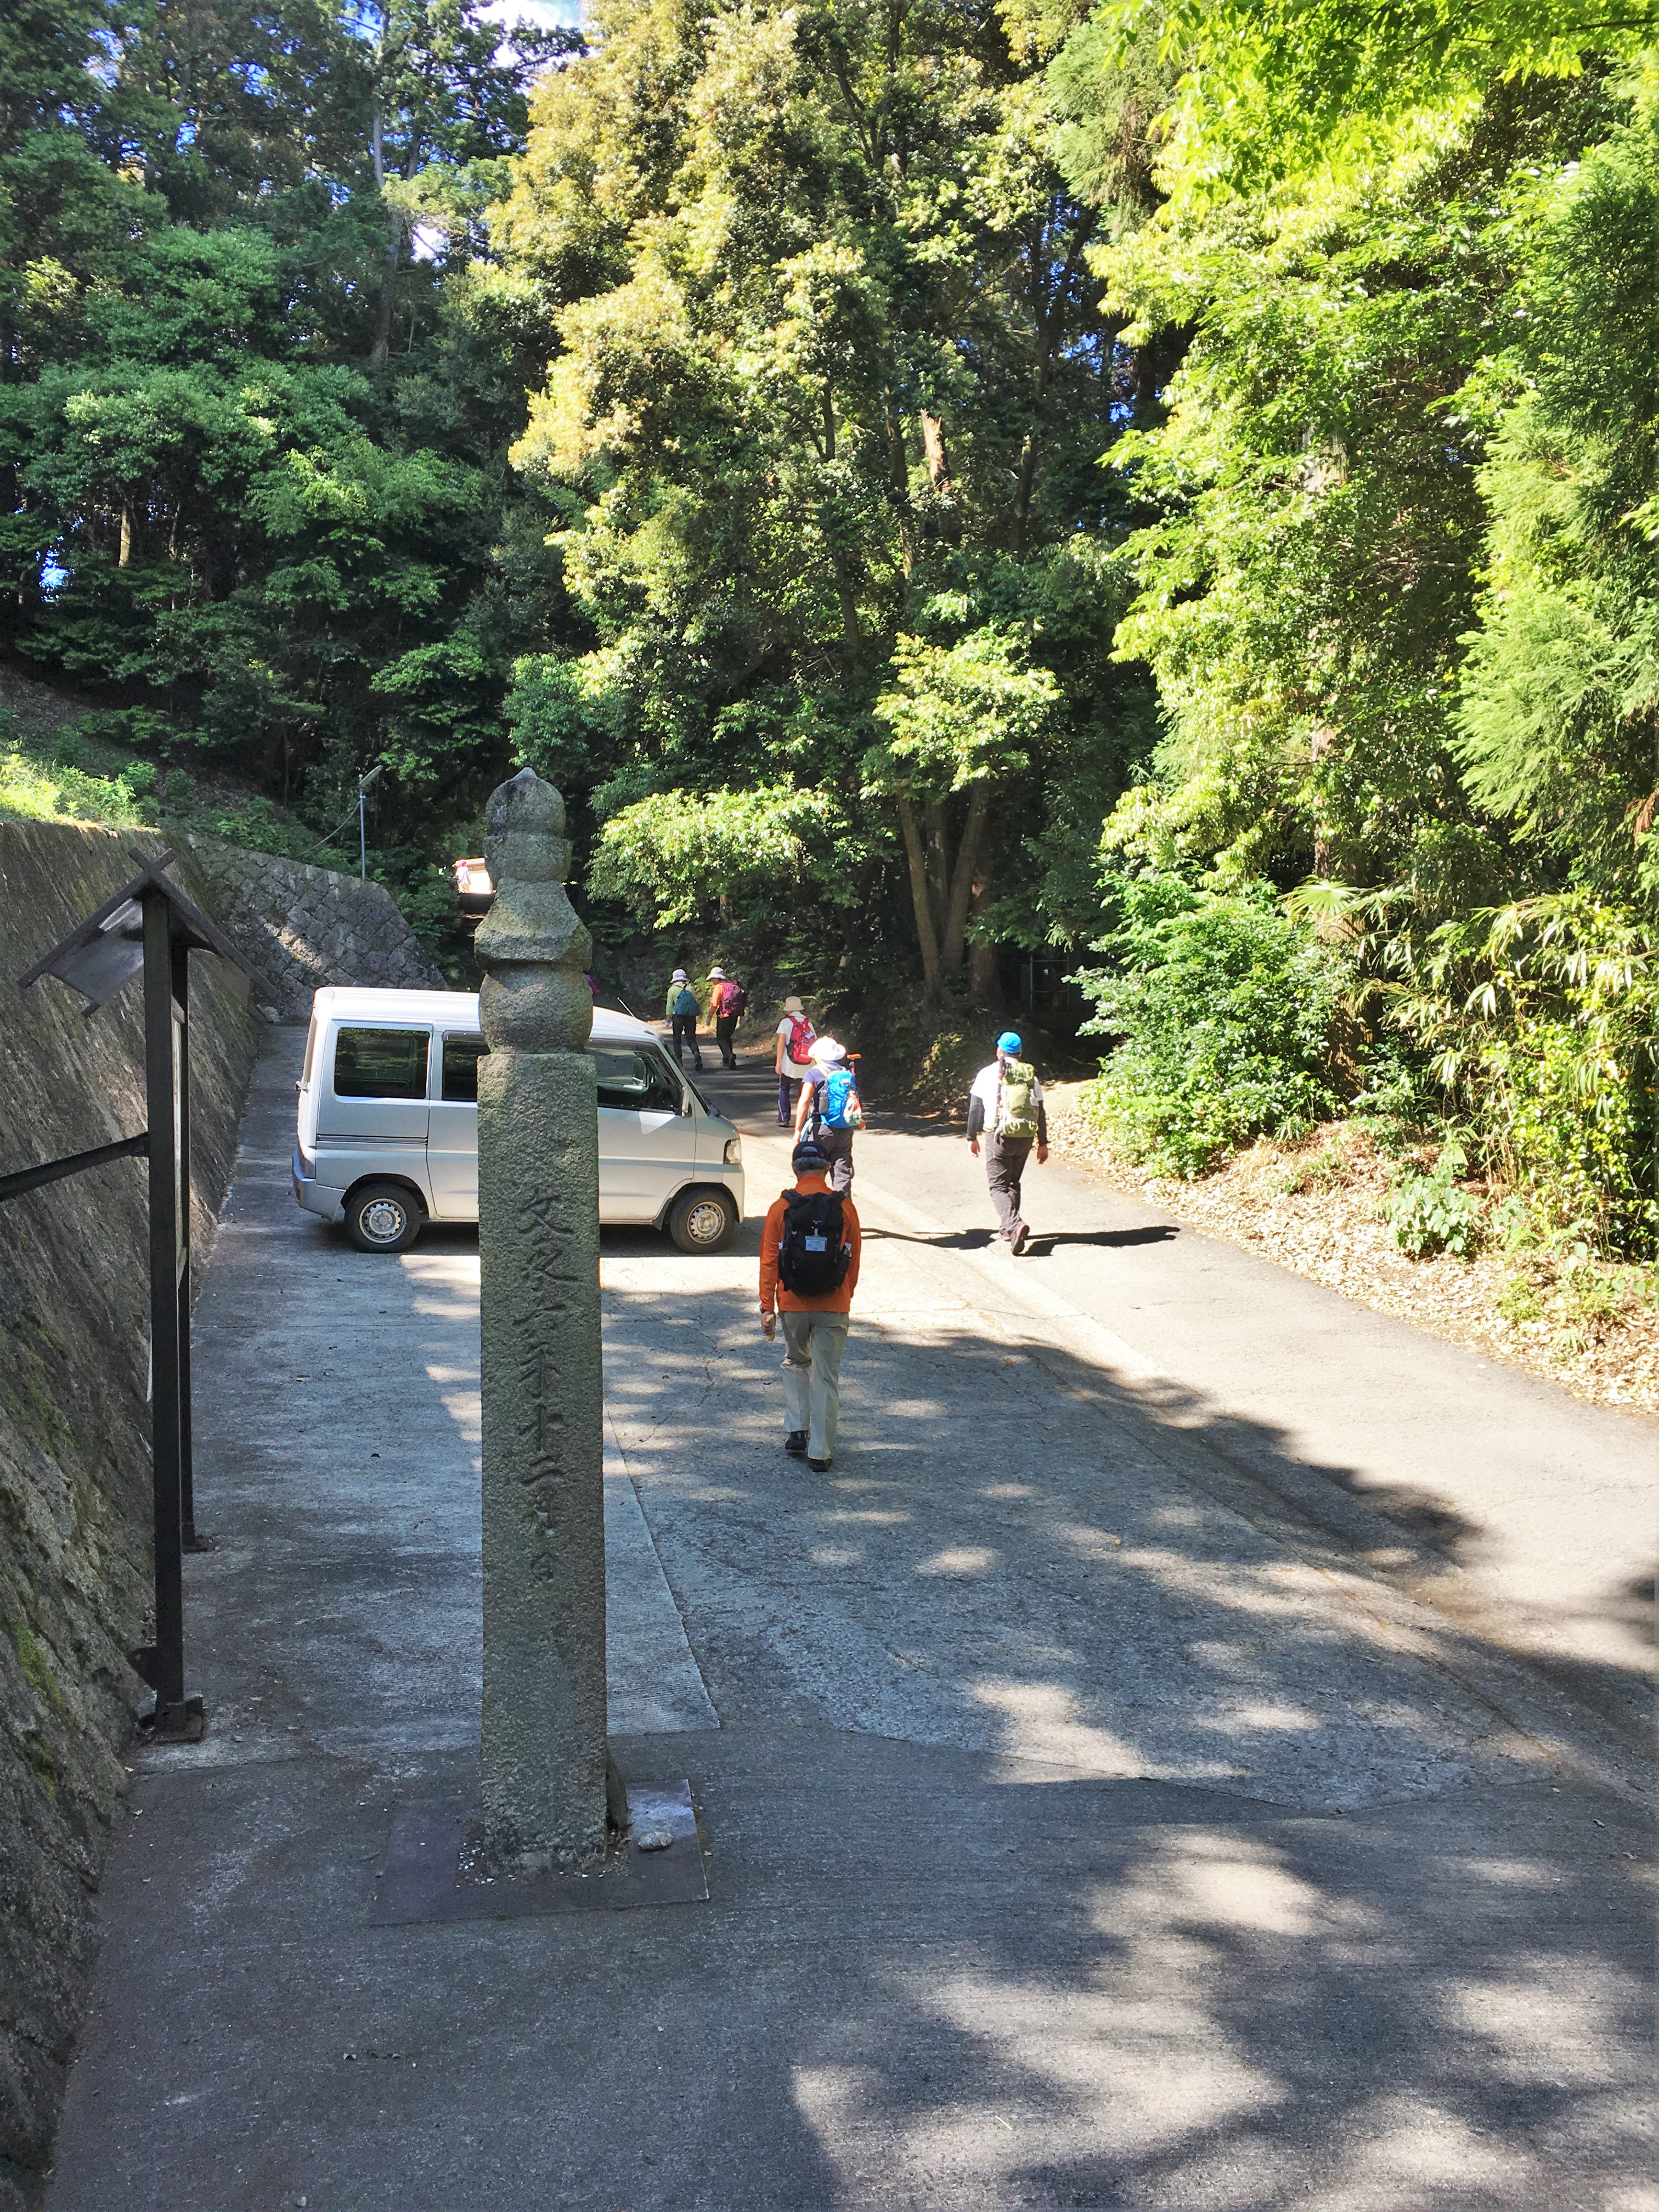 the very beginning of the Choishimich trail to Koyasan